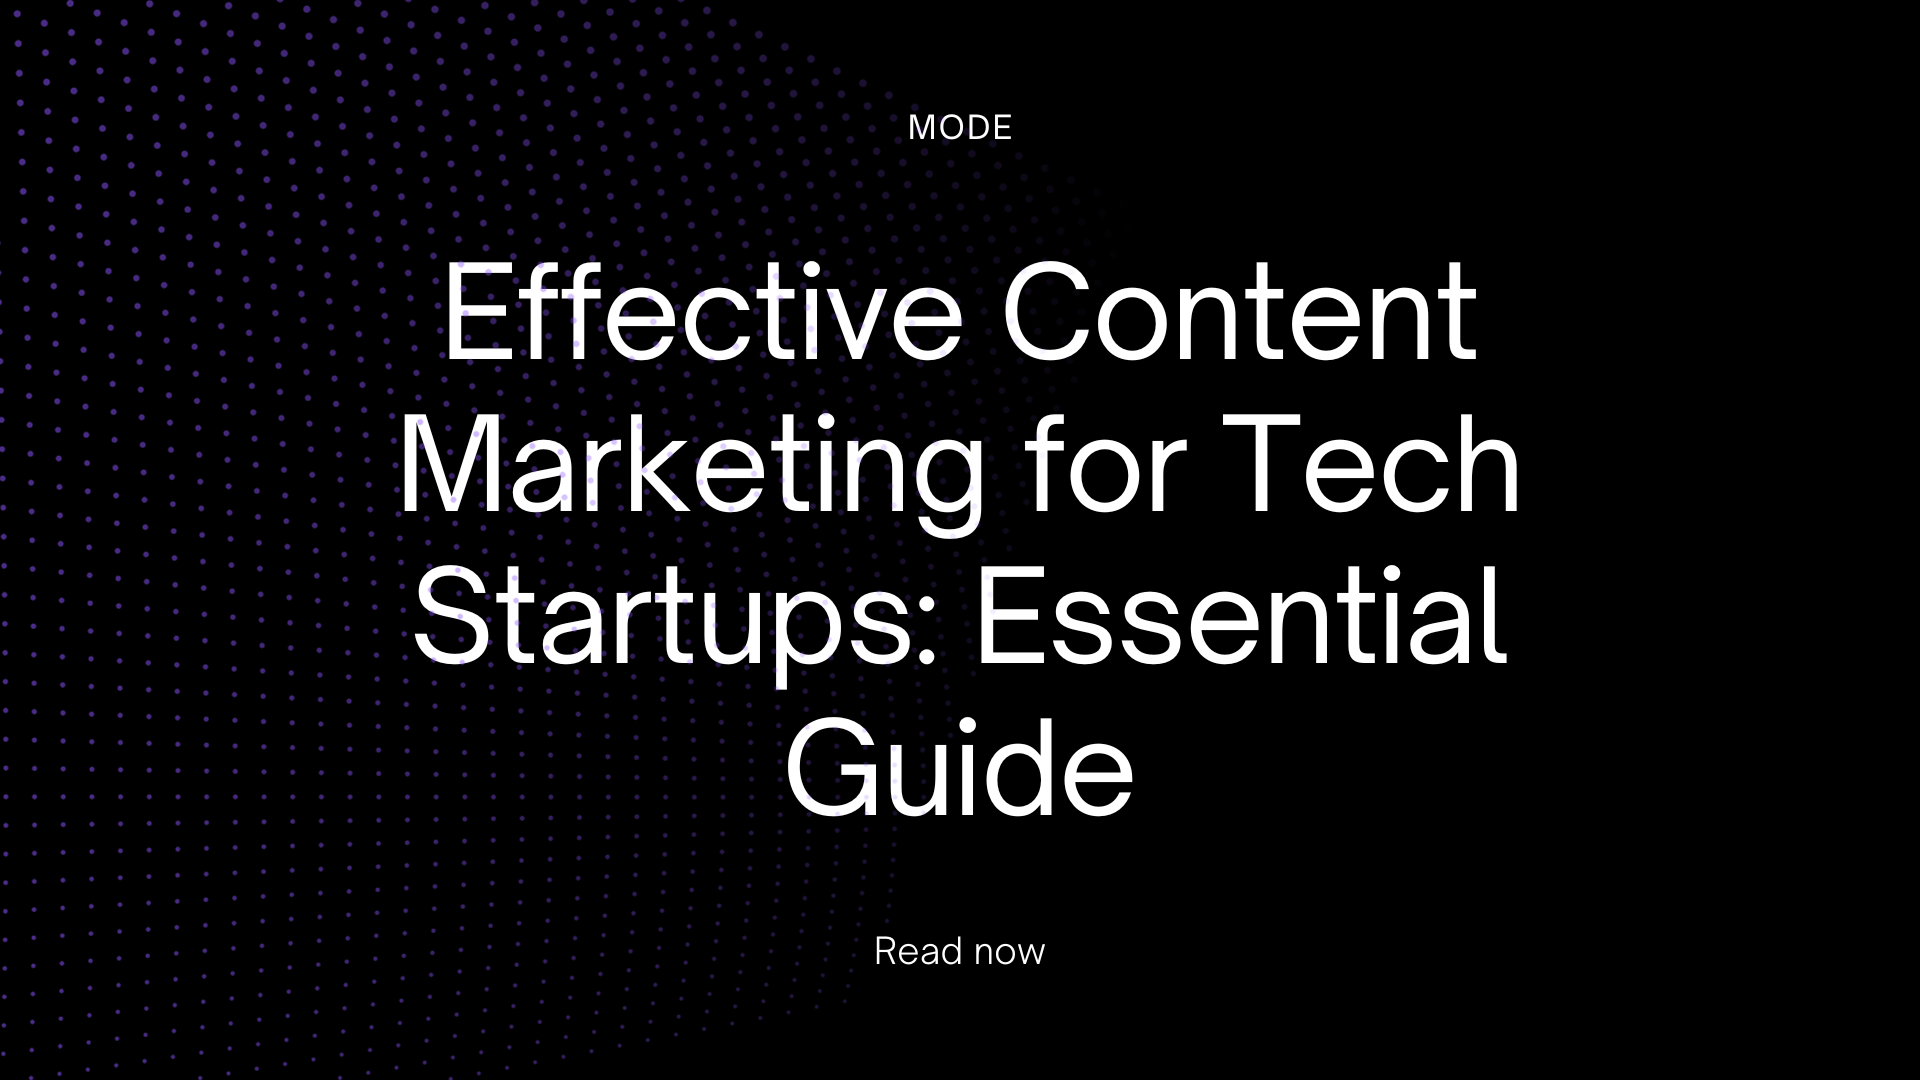 Effective Content Marketing for Tech Startups: Essential Guide